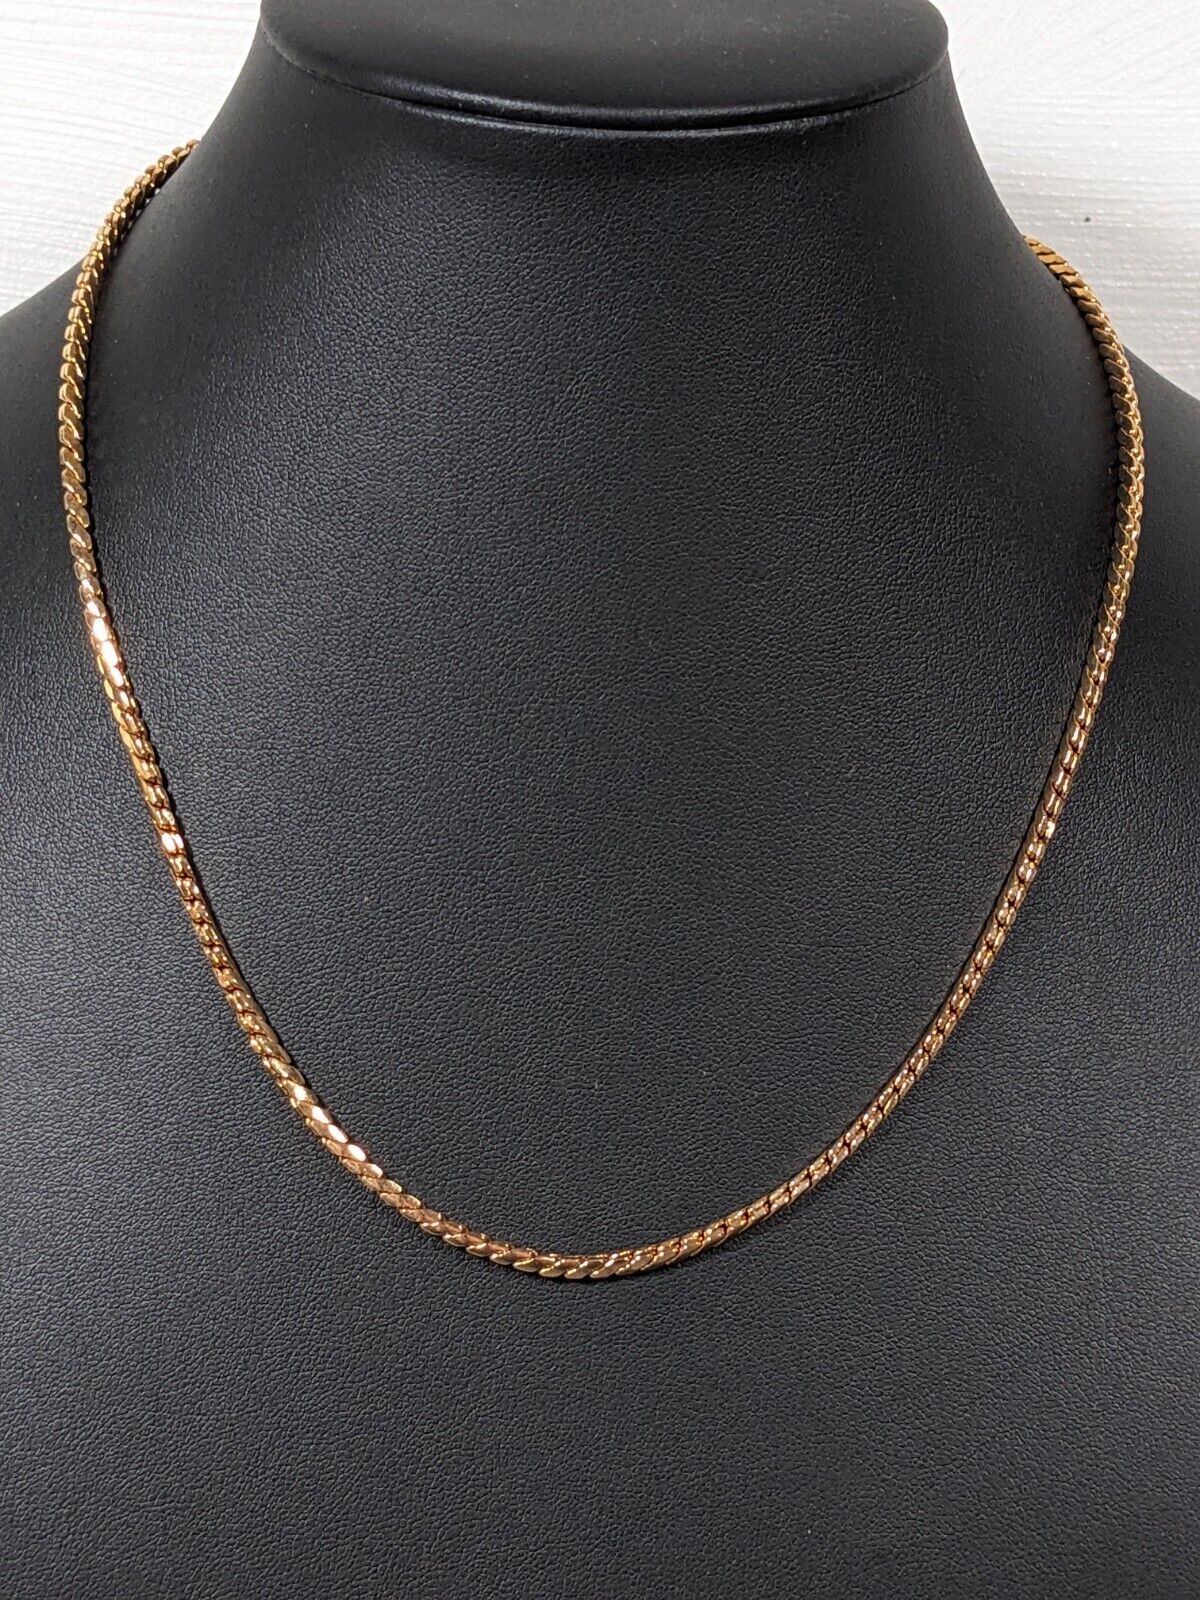 Vintage Amway Gold Tone S Chain 2mm Chain Necklace 18 inches